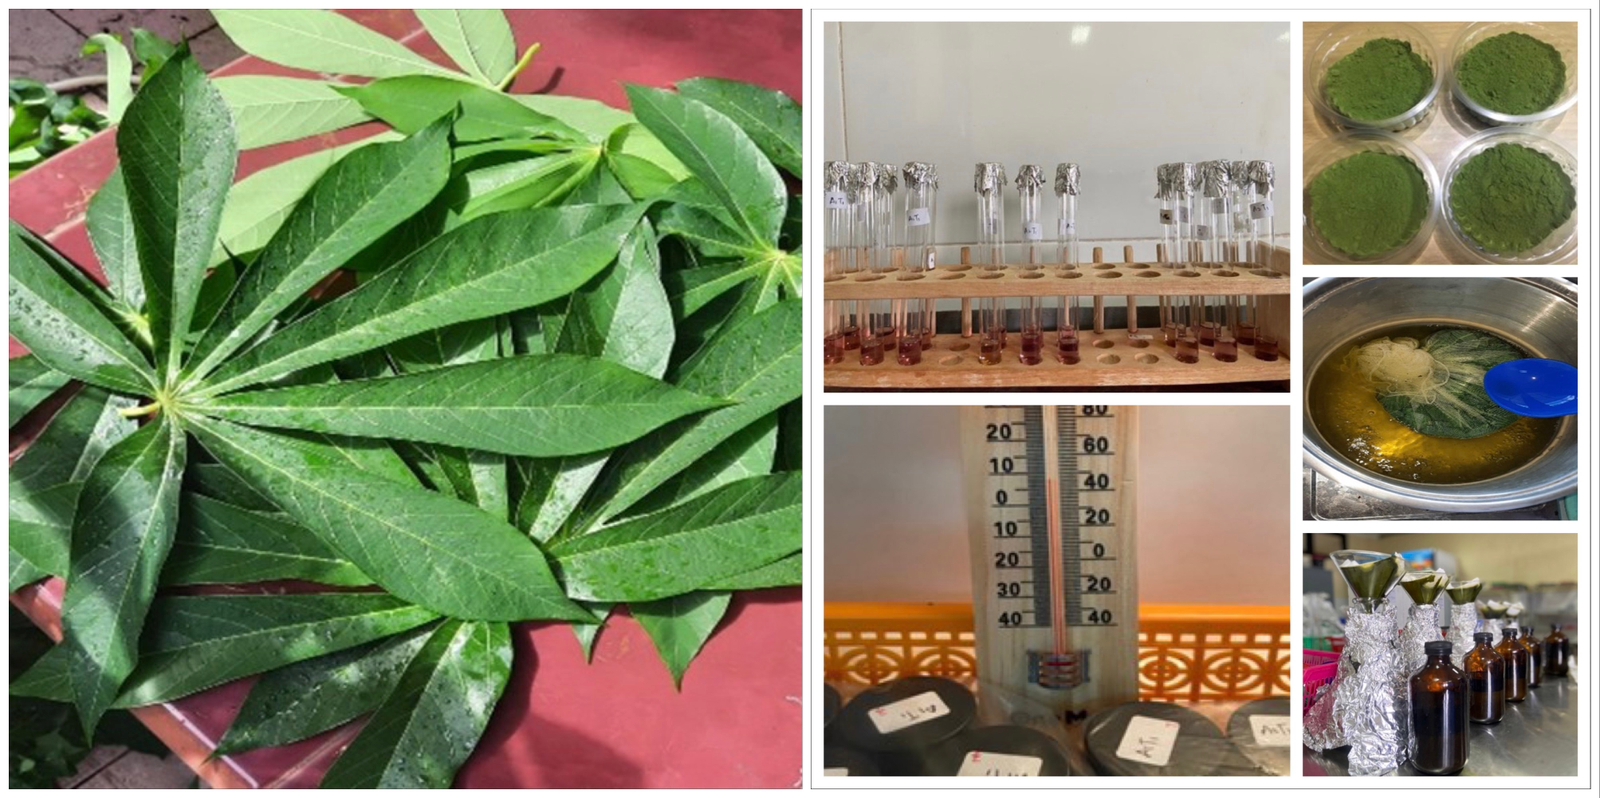 Successfully Earning a Bachelor Degree in Agricultural Technology, Sinta Anggraeni Compares Initial pH and Storage Temperature of Natural Coloring Extracts of Cassava Leaves